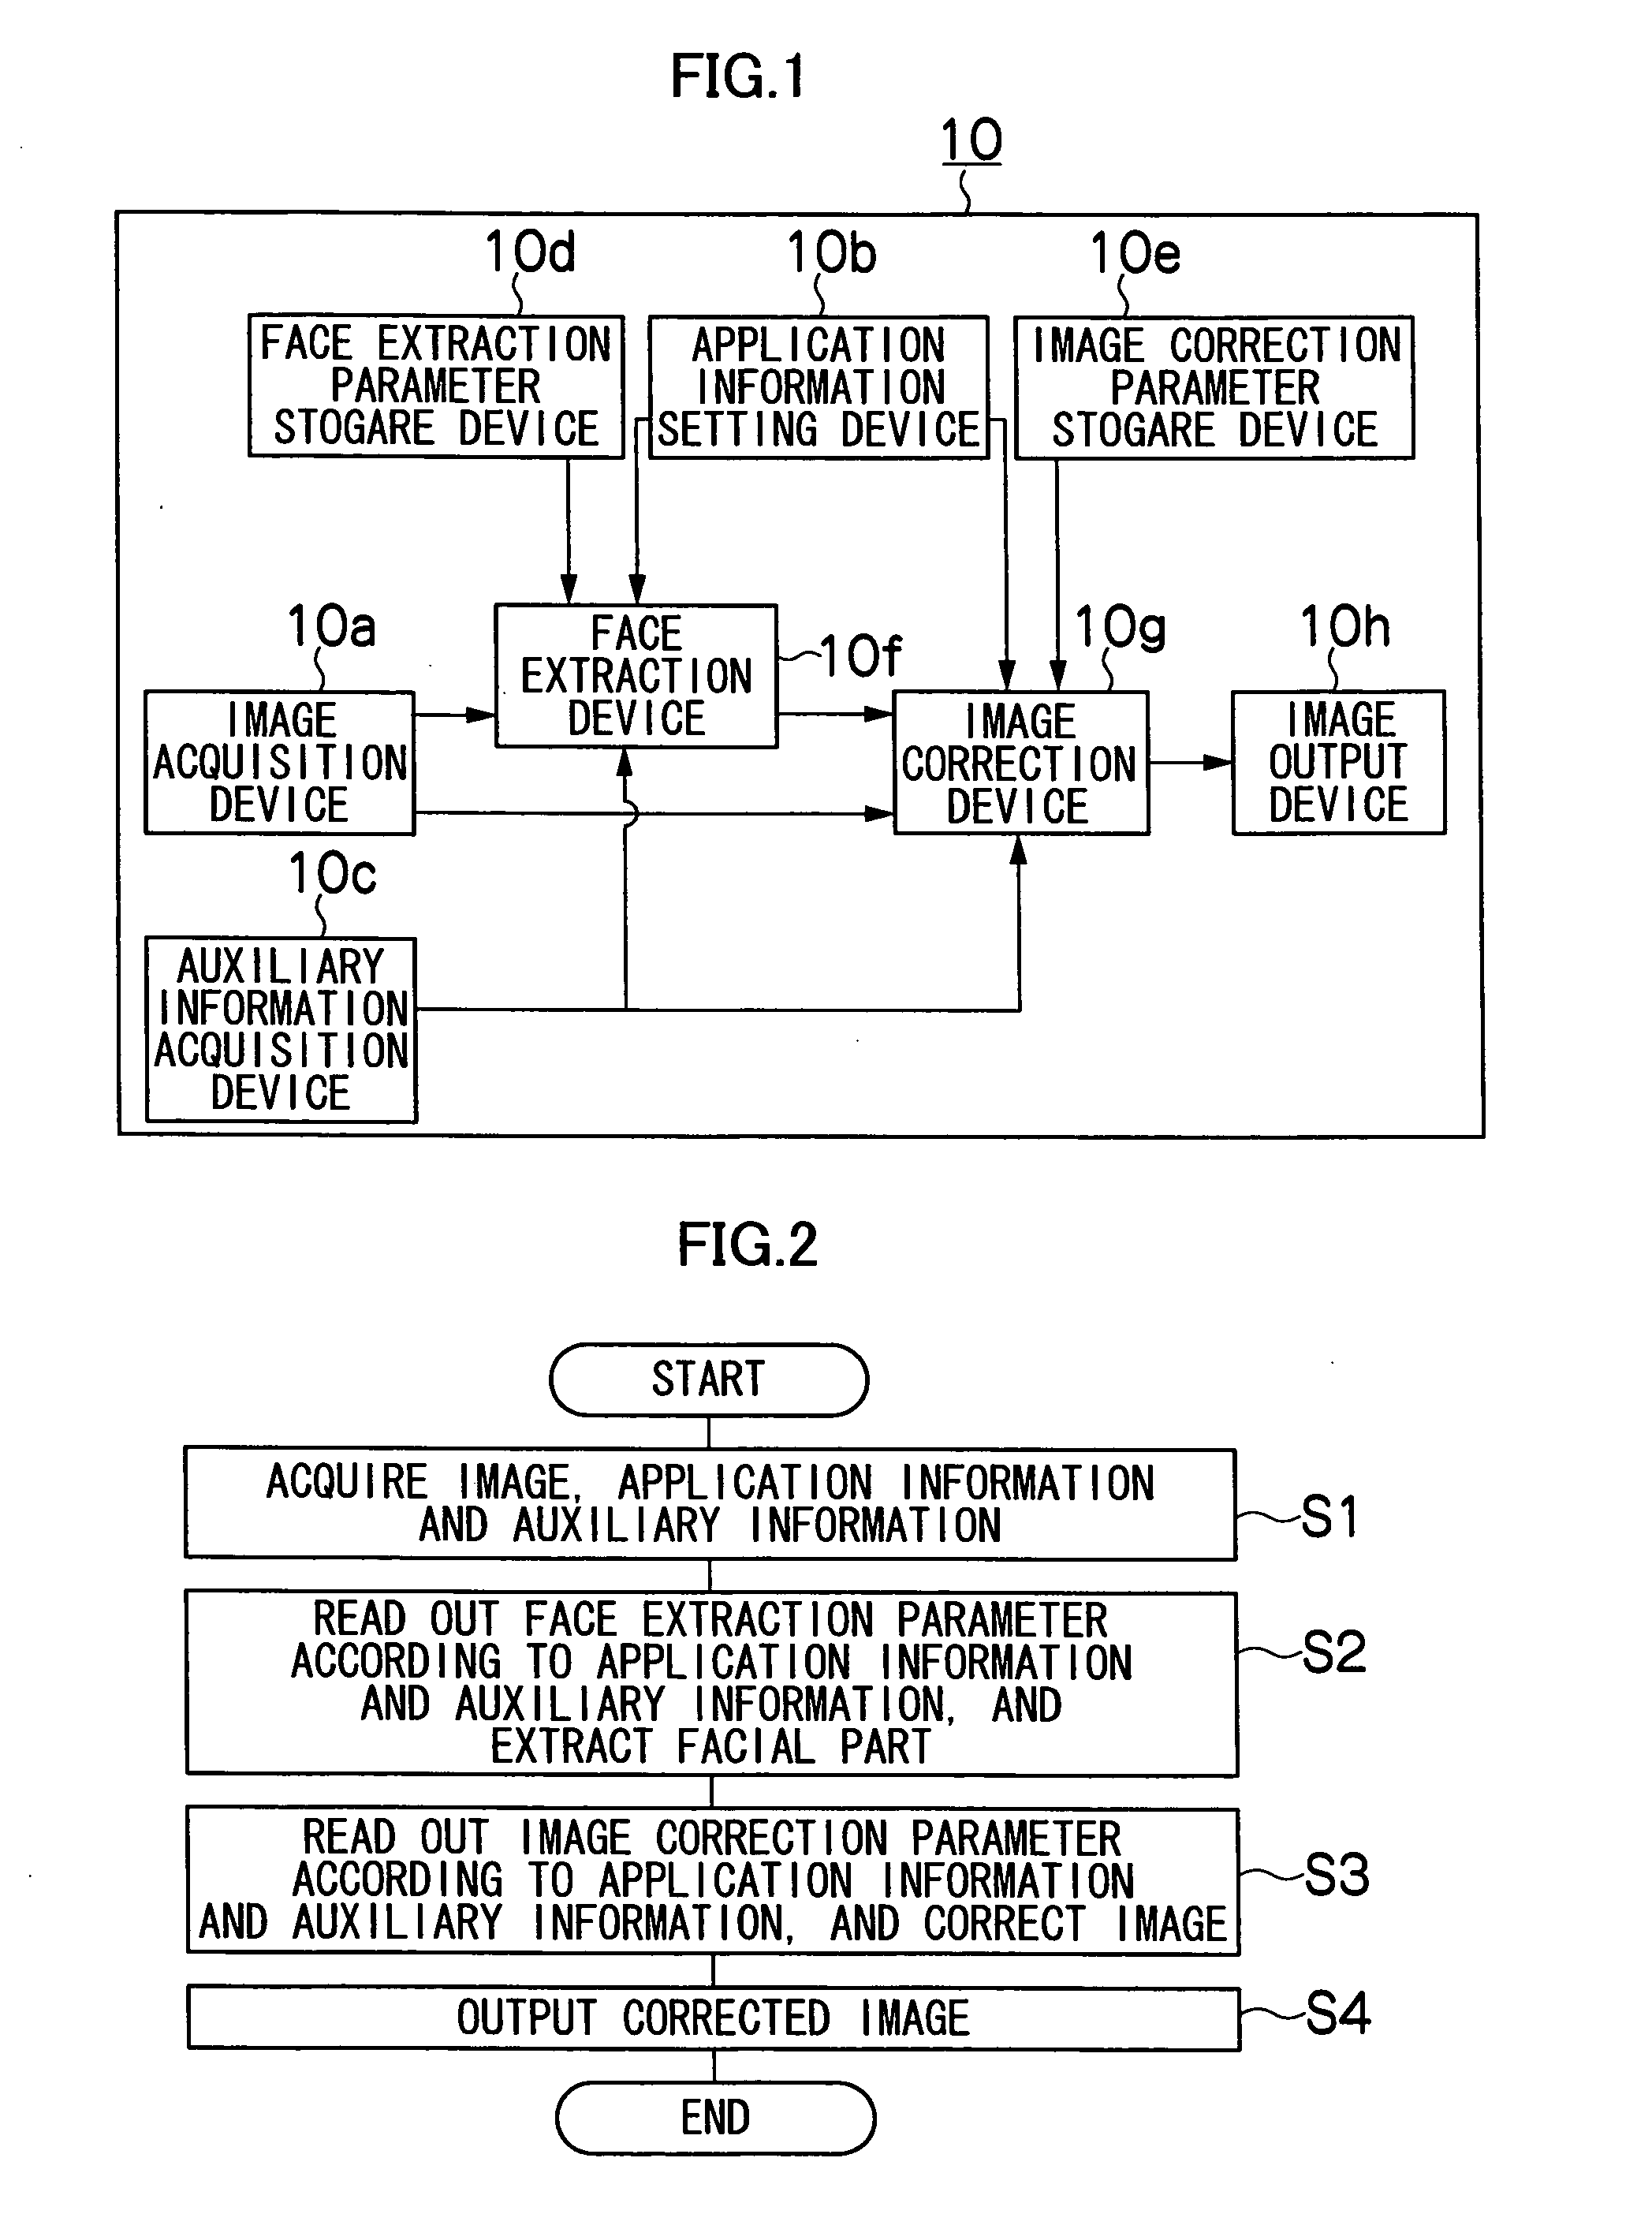 Image processing apparatus and print system